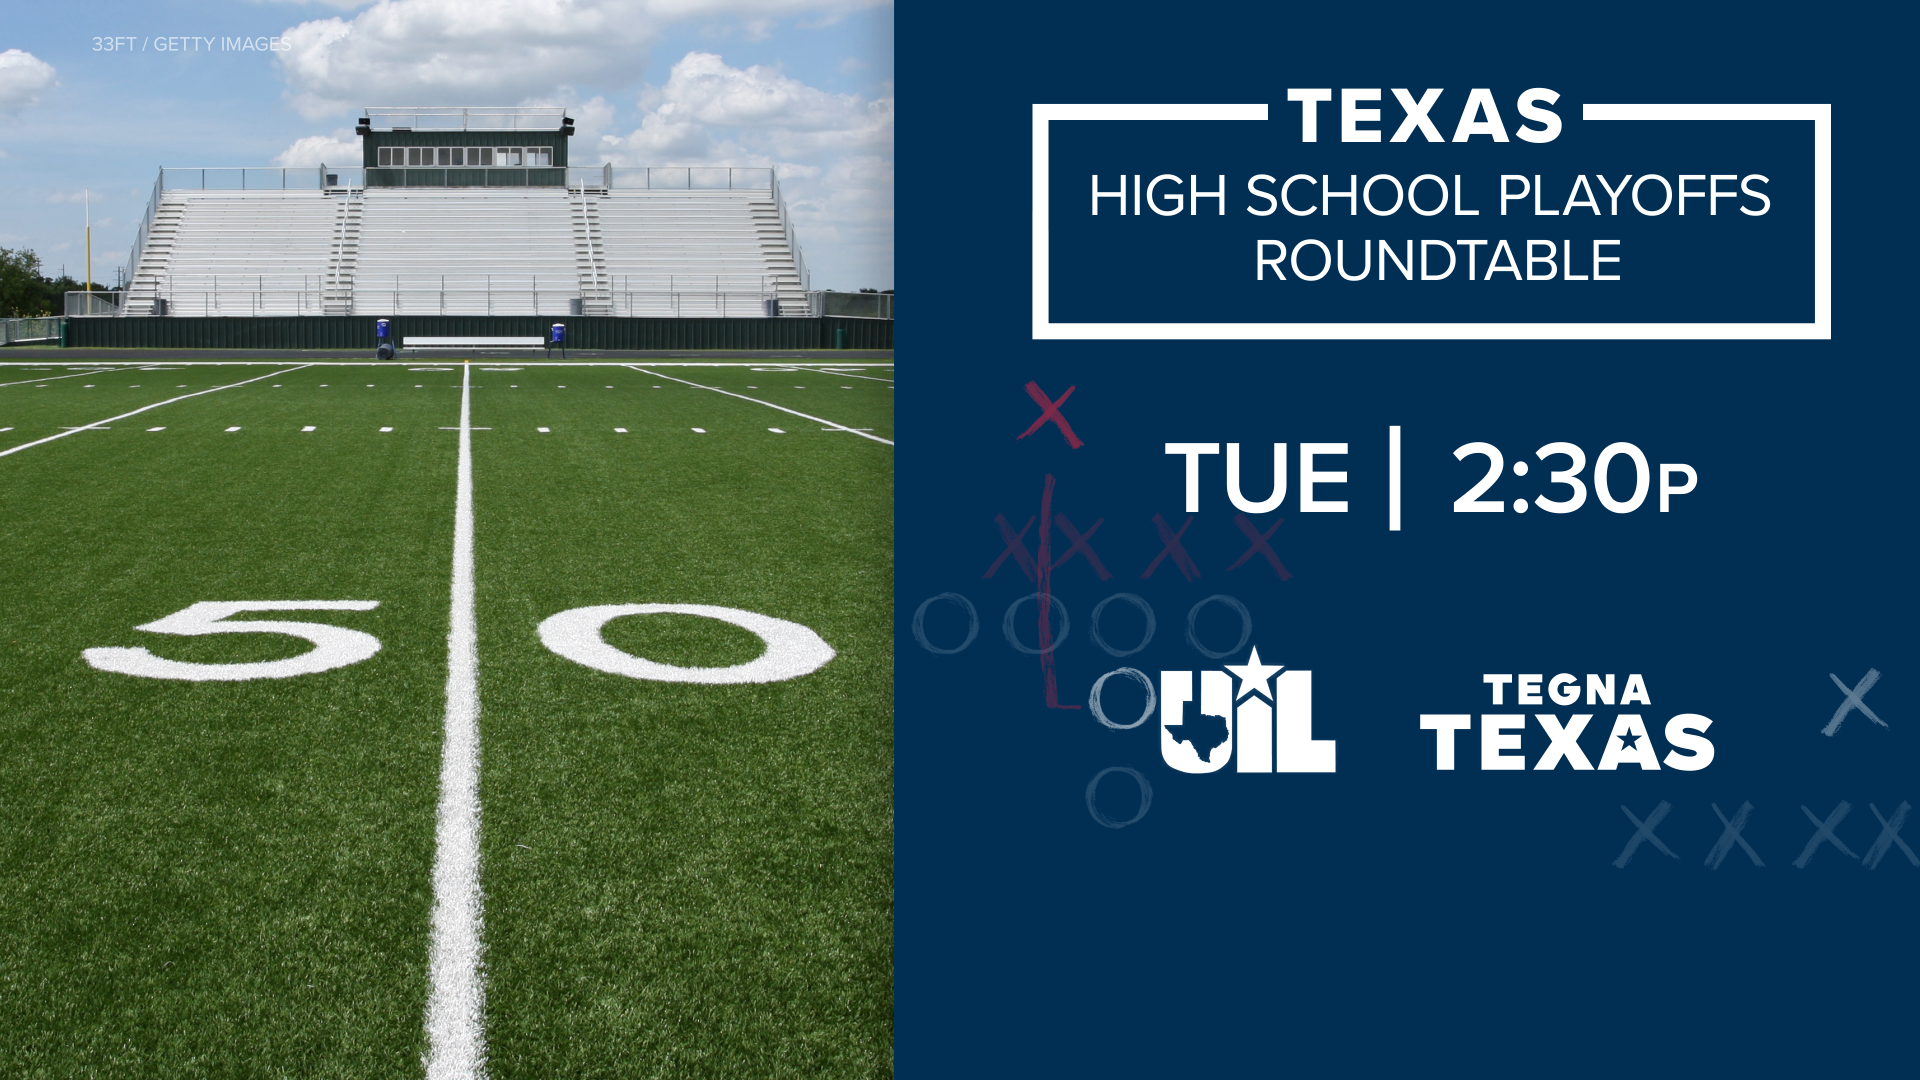 Texas high school football playoffs are here and we're breaking down key matchups live, Tuesday at 2:30 p.m.